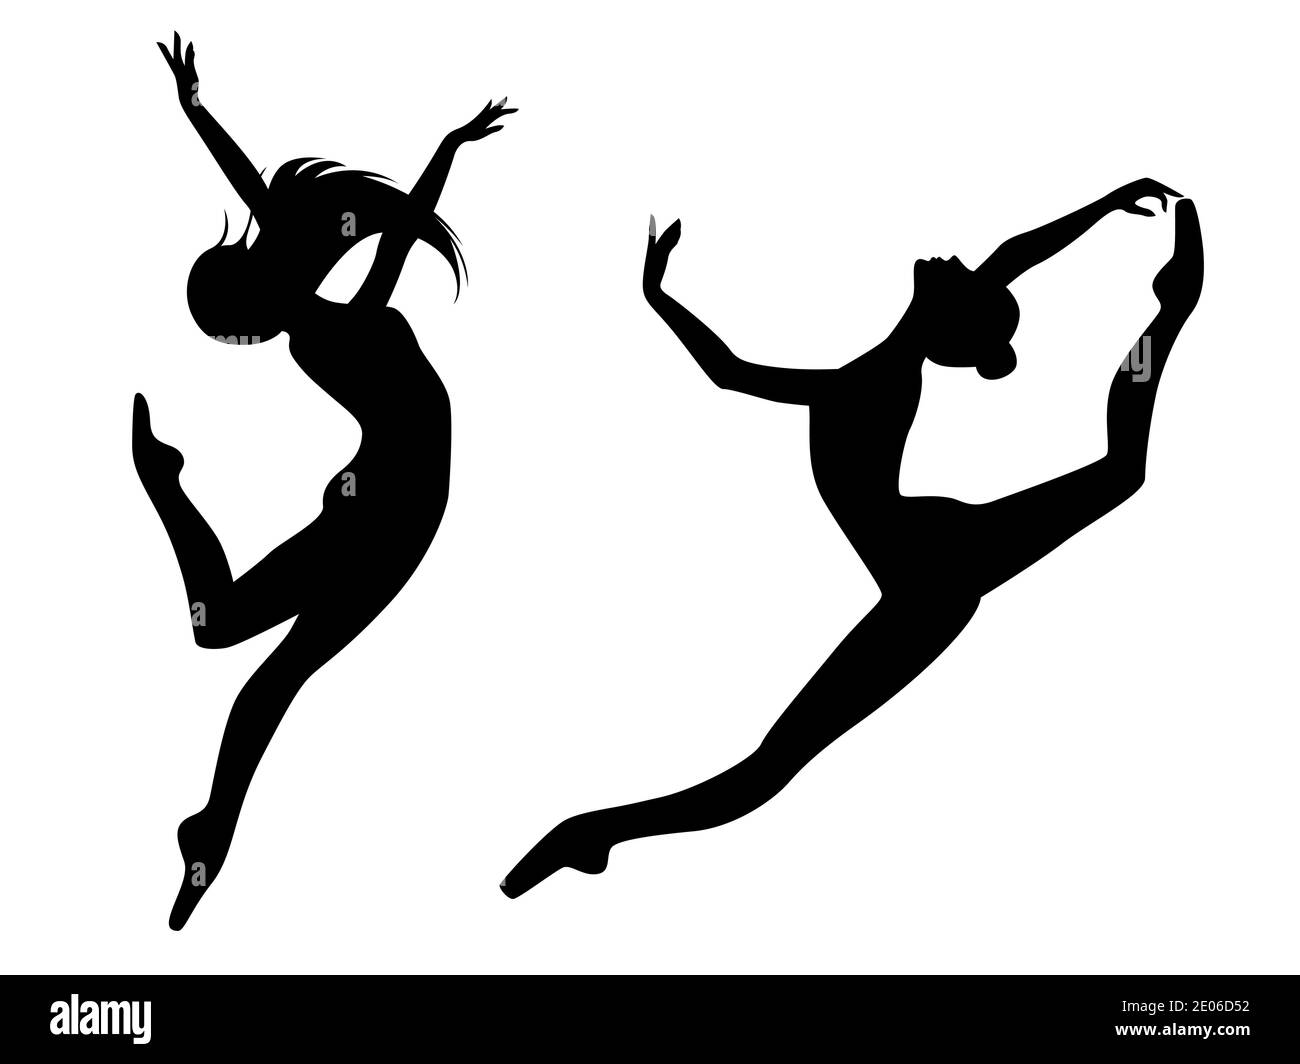 Abstract black stencil silhouettes of slender charming women dancer in move, hand drawing vector illustration Stock Vector